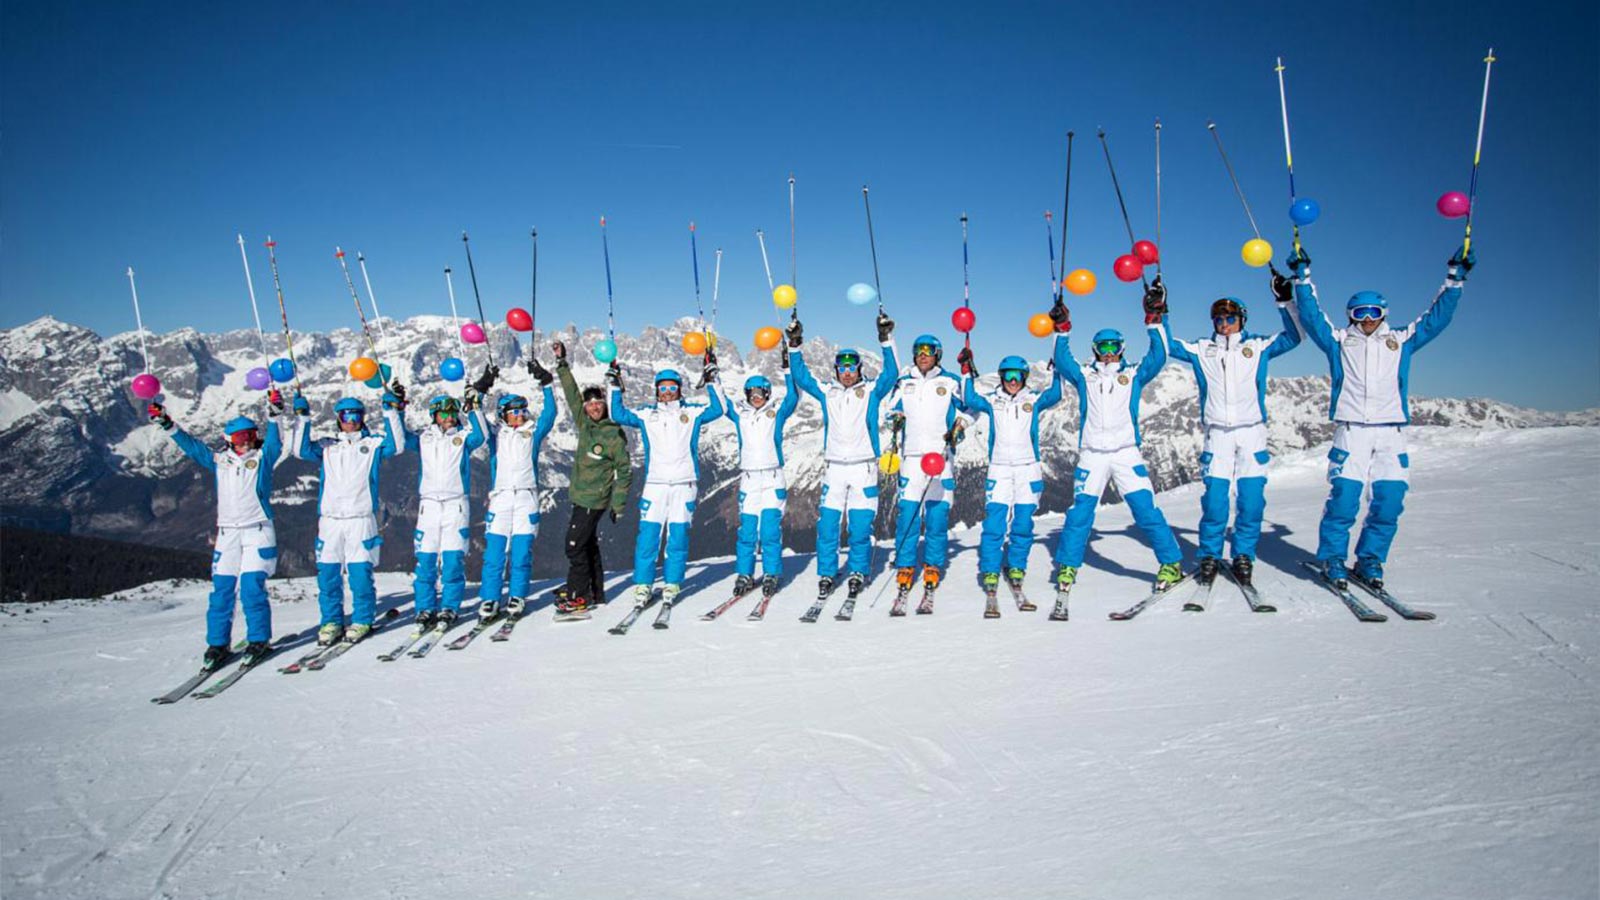 A group of skiers in Andalo in Trentino near Residence Antares